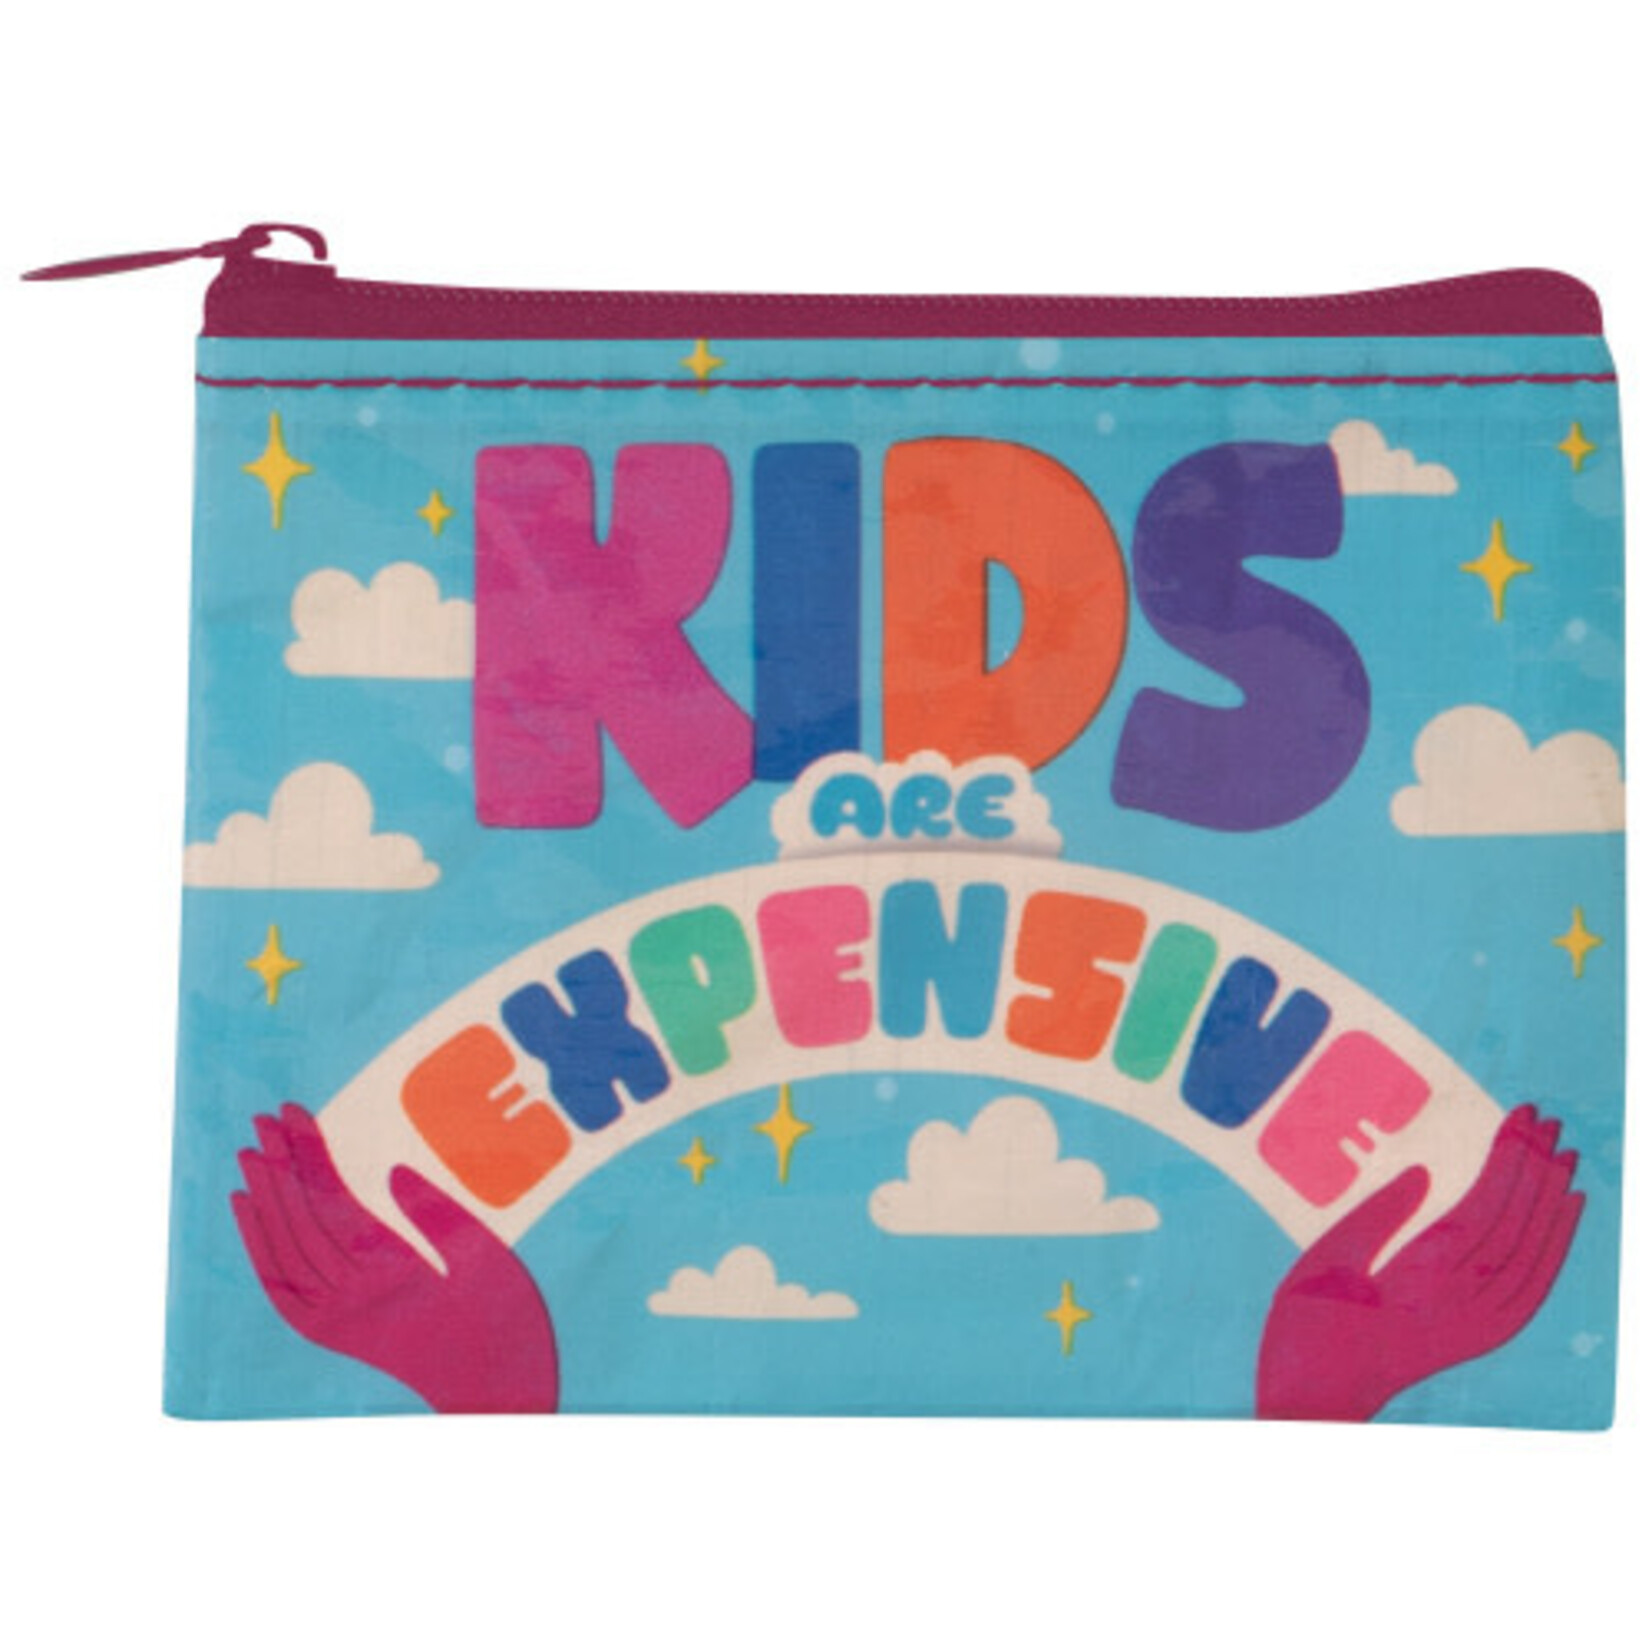 Blue Q Kids are Expensive Coin Purse